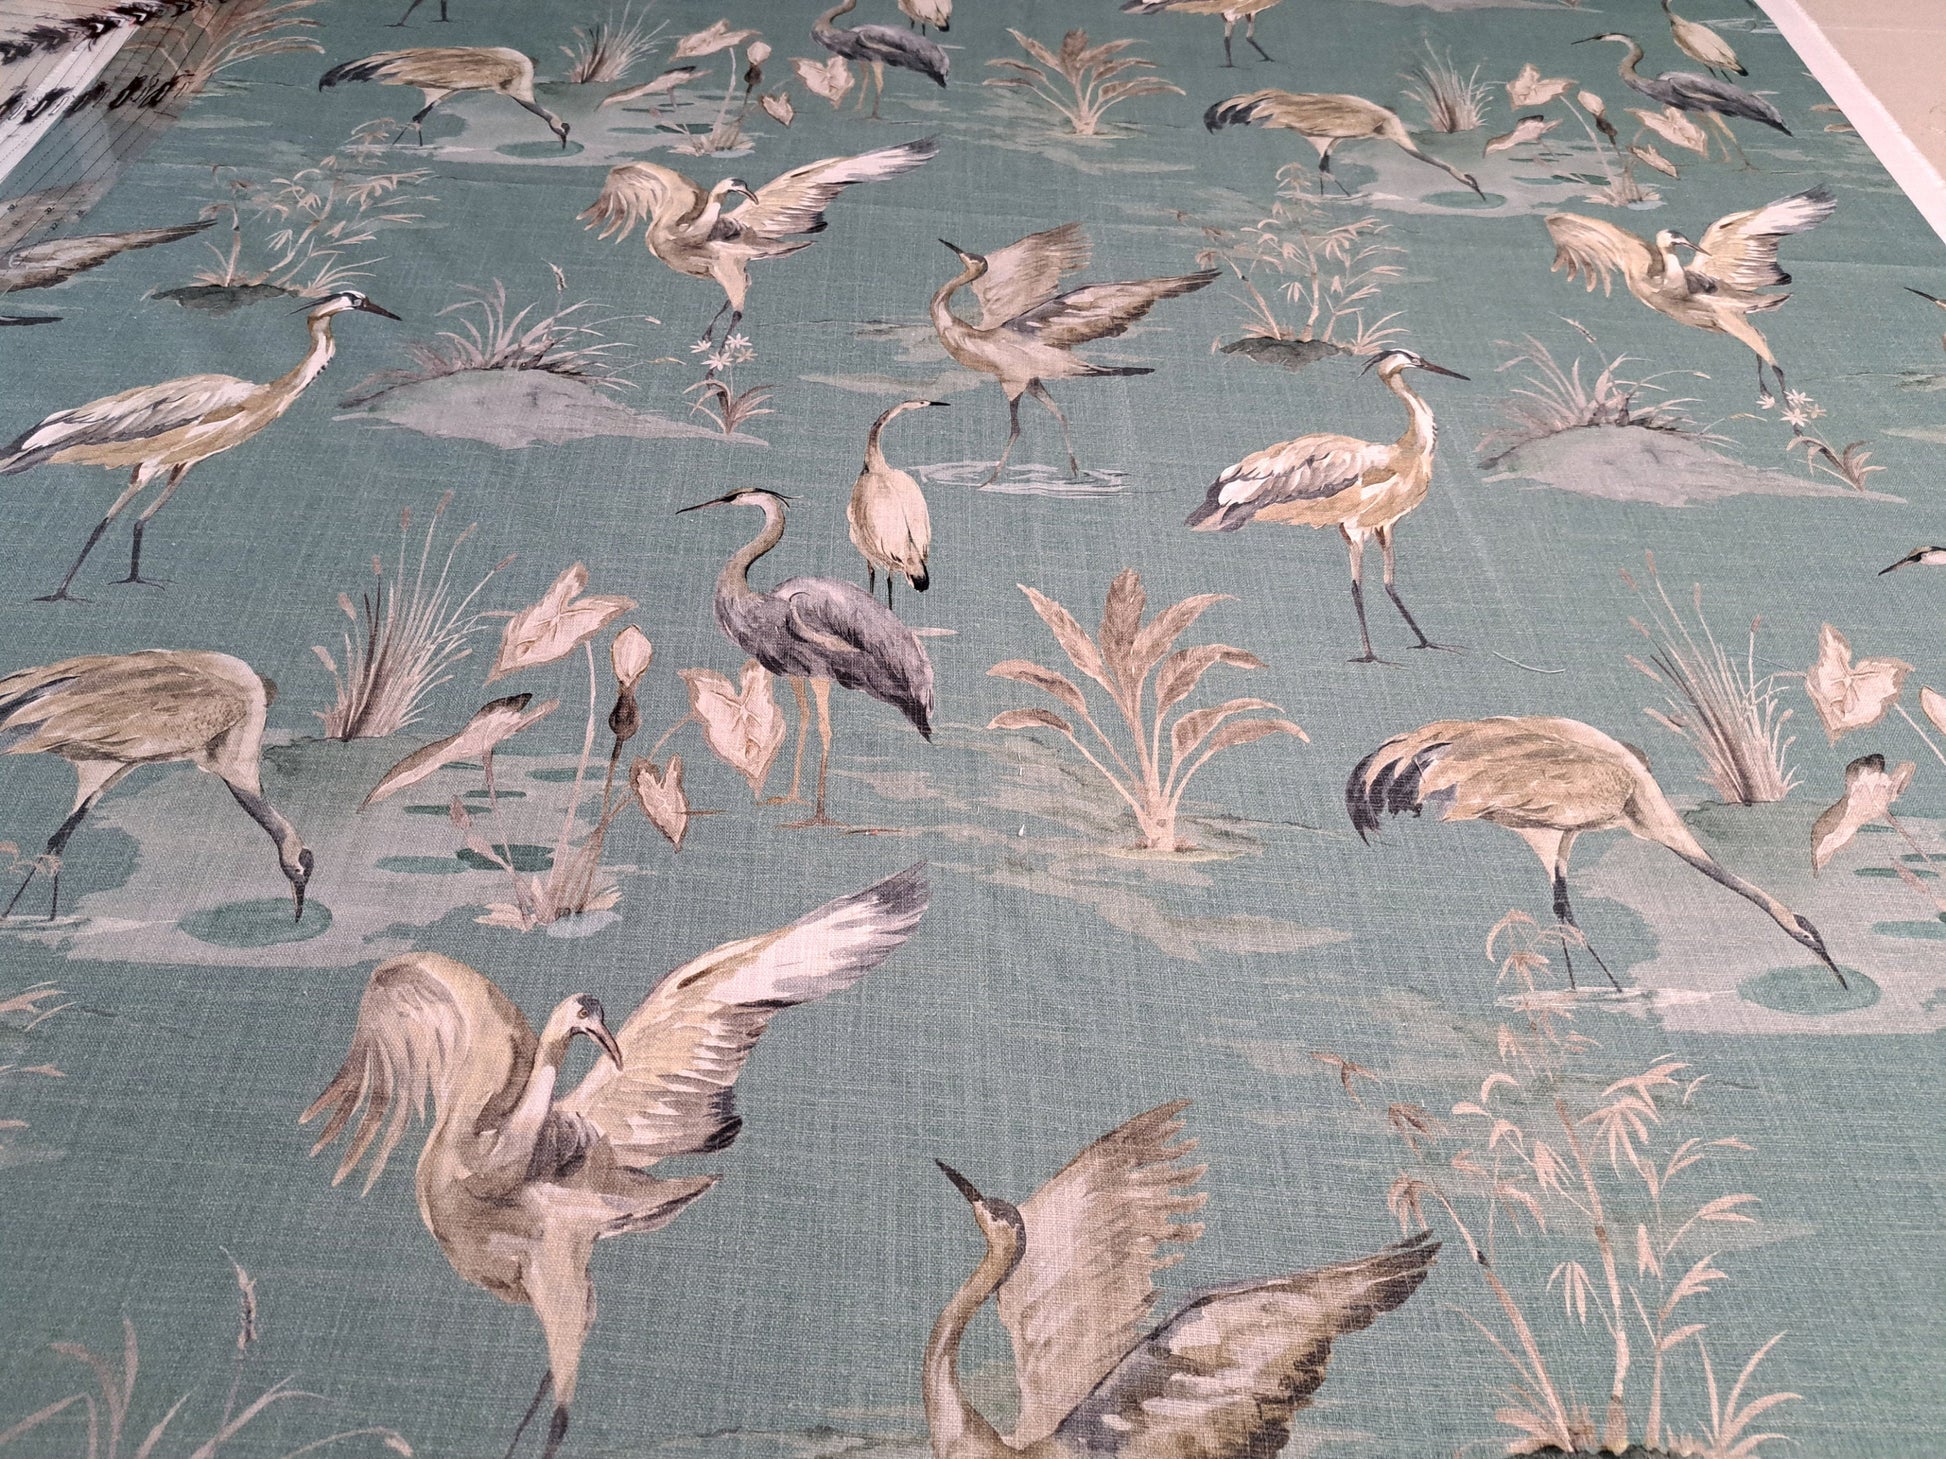 Heron and Seagrass Print Pillow Cover